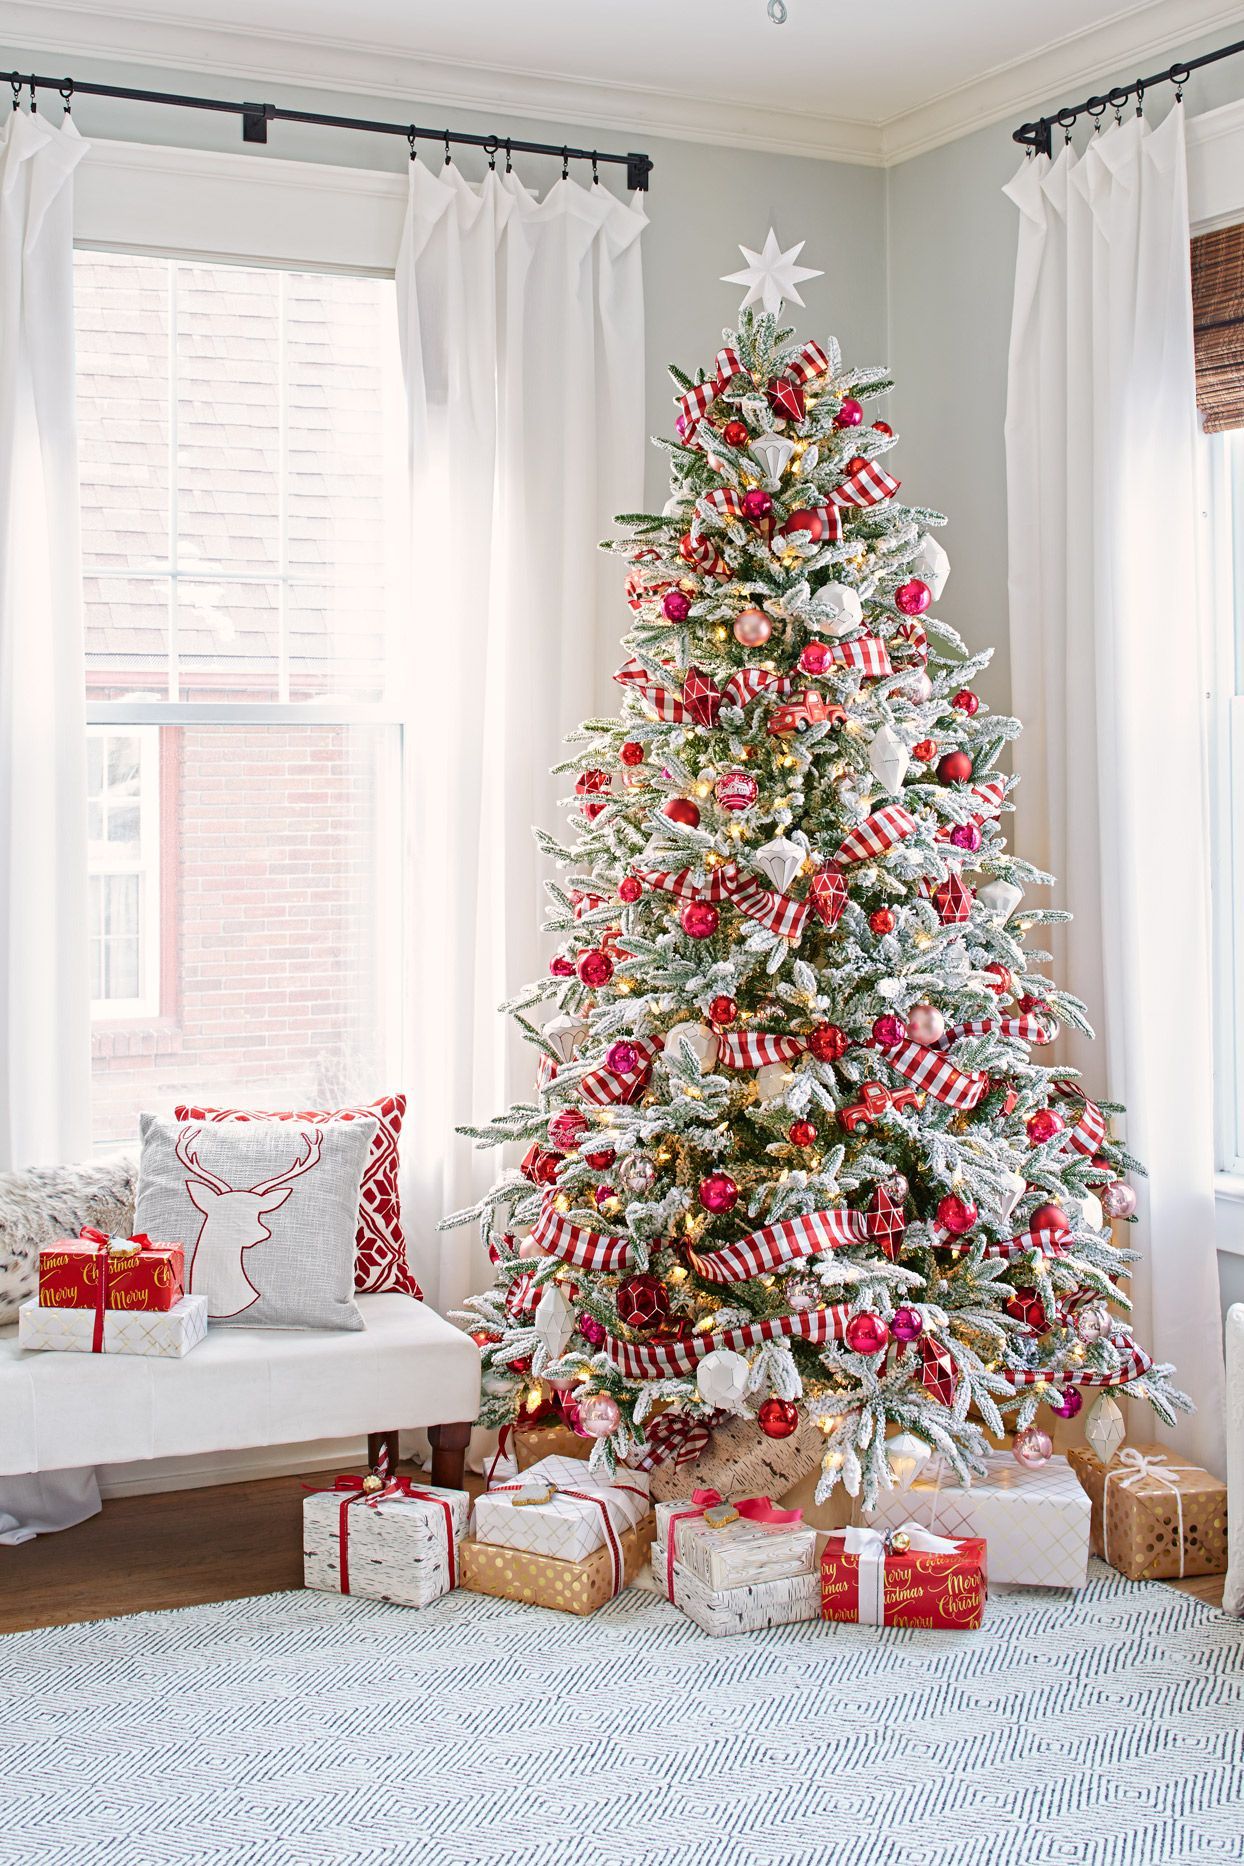 46 Stunning Ways to Trim Your Christmas Tree - 46 Stunning Ways to Trim Your Christmas Tree -   16 christmas tree themes colors ideas